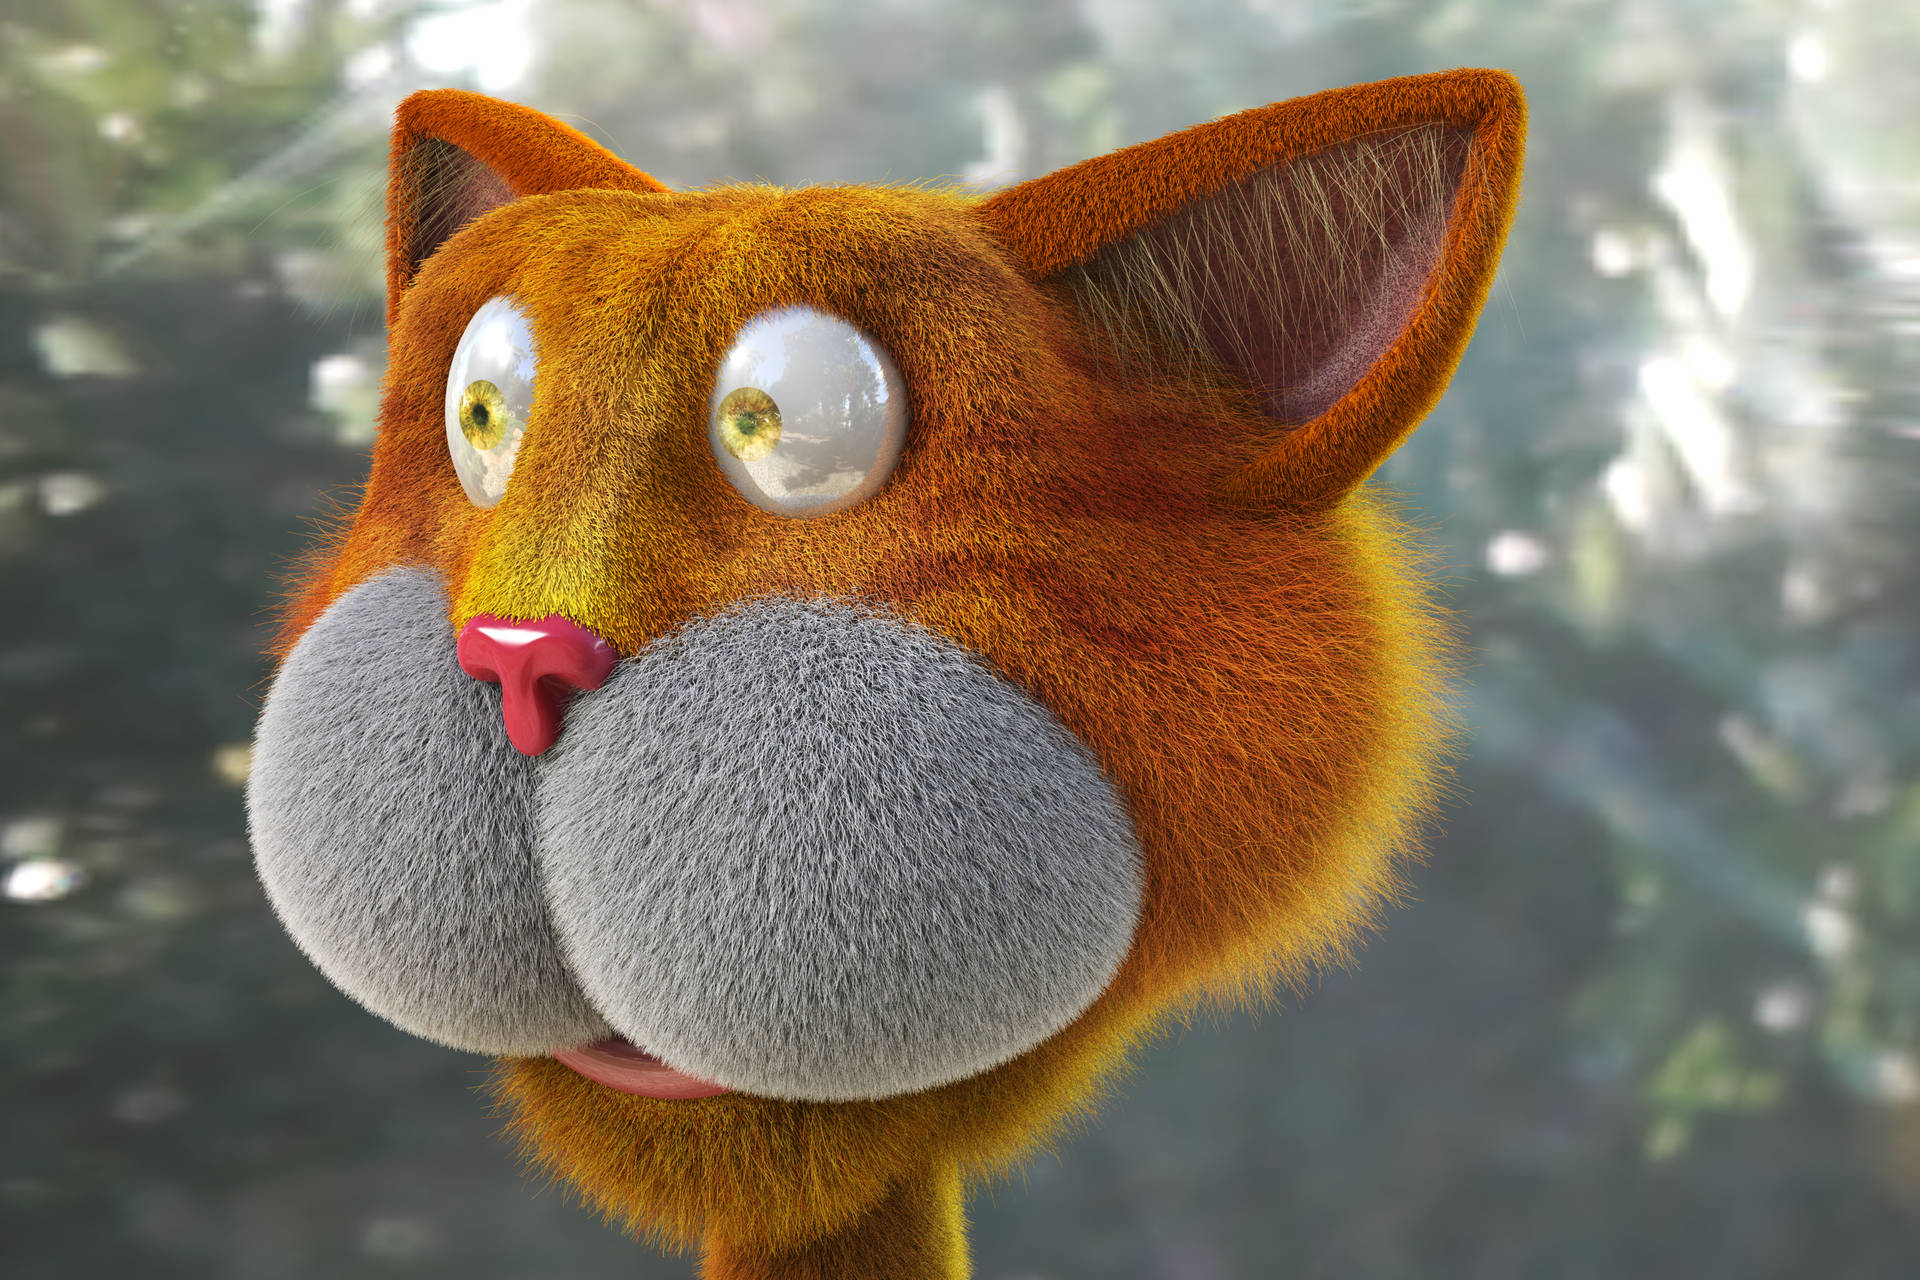 This Adorably Lifelike 3d Orange Cat Will Brighten Your Day! Background